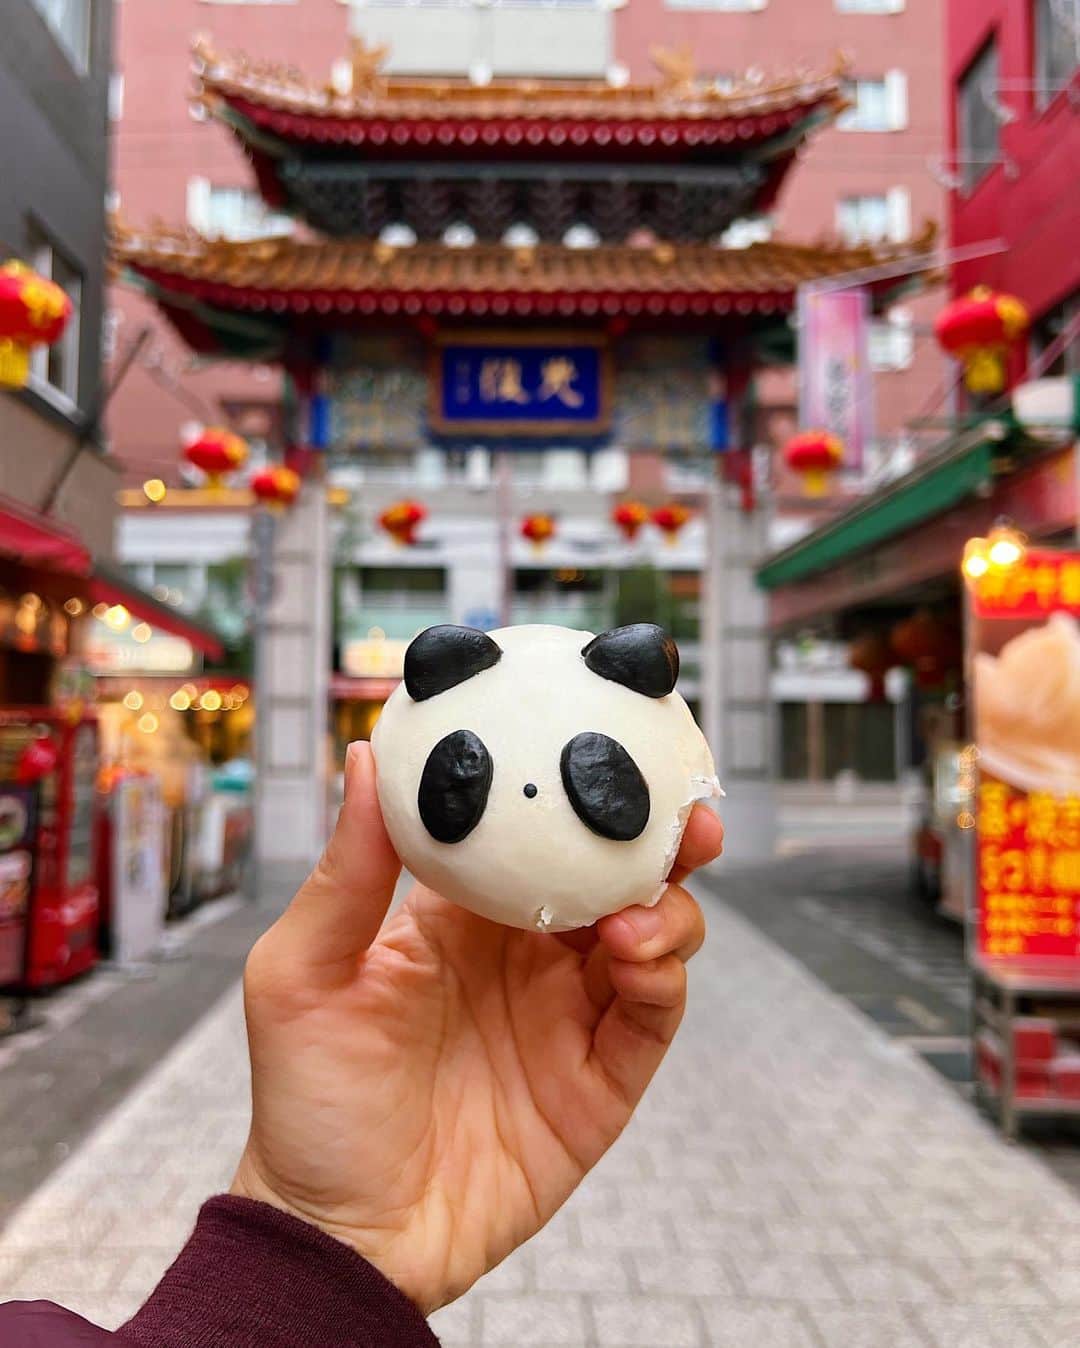 Girleatworldのインスタグラム：「🐼 Panda red bean pau in Chinatown in Kobe, Japan.  Nankin-machi originated in 1868, when Kobe's port was opened to foreigners including Chinese immigrants, many coming from the city of Nanjing, hence the name of the neighborhood "Nankinmachi" (Nanking Town).  Now, the neighborhood is filled with hundreds of chinese restaurant and food vendors selling snacks. Come hungry!  #girleatworld #shotoniphone #🐼 #kobe #japan #nankinmachi」